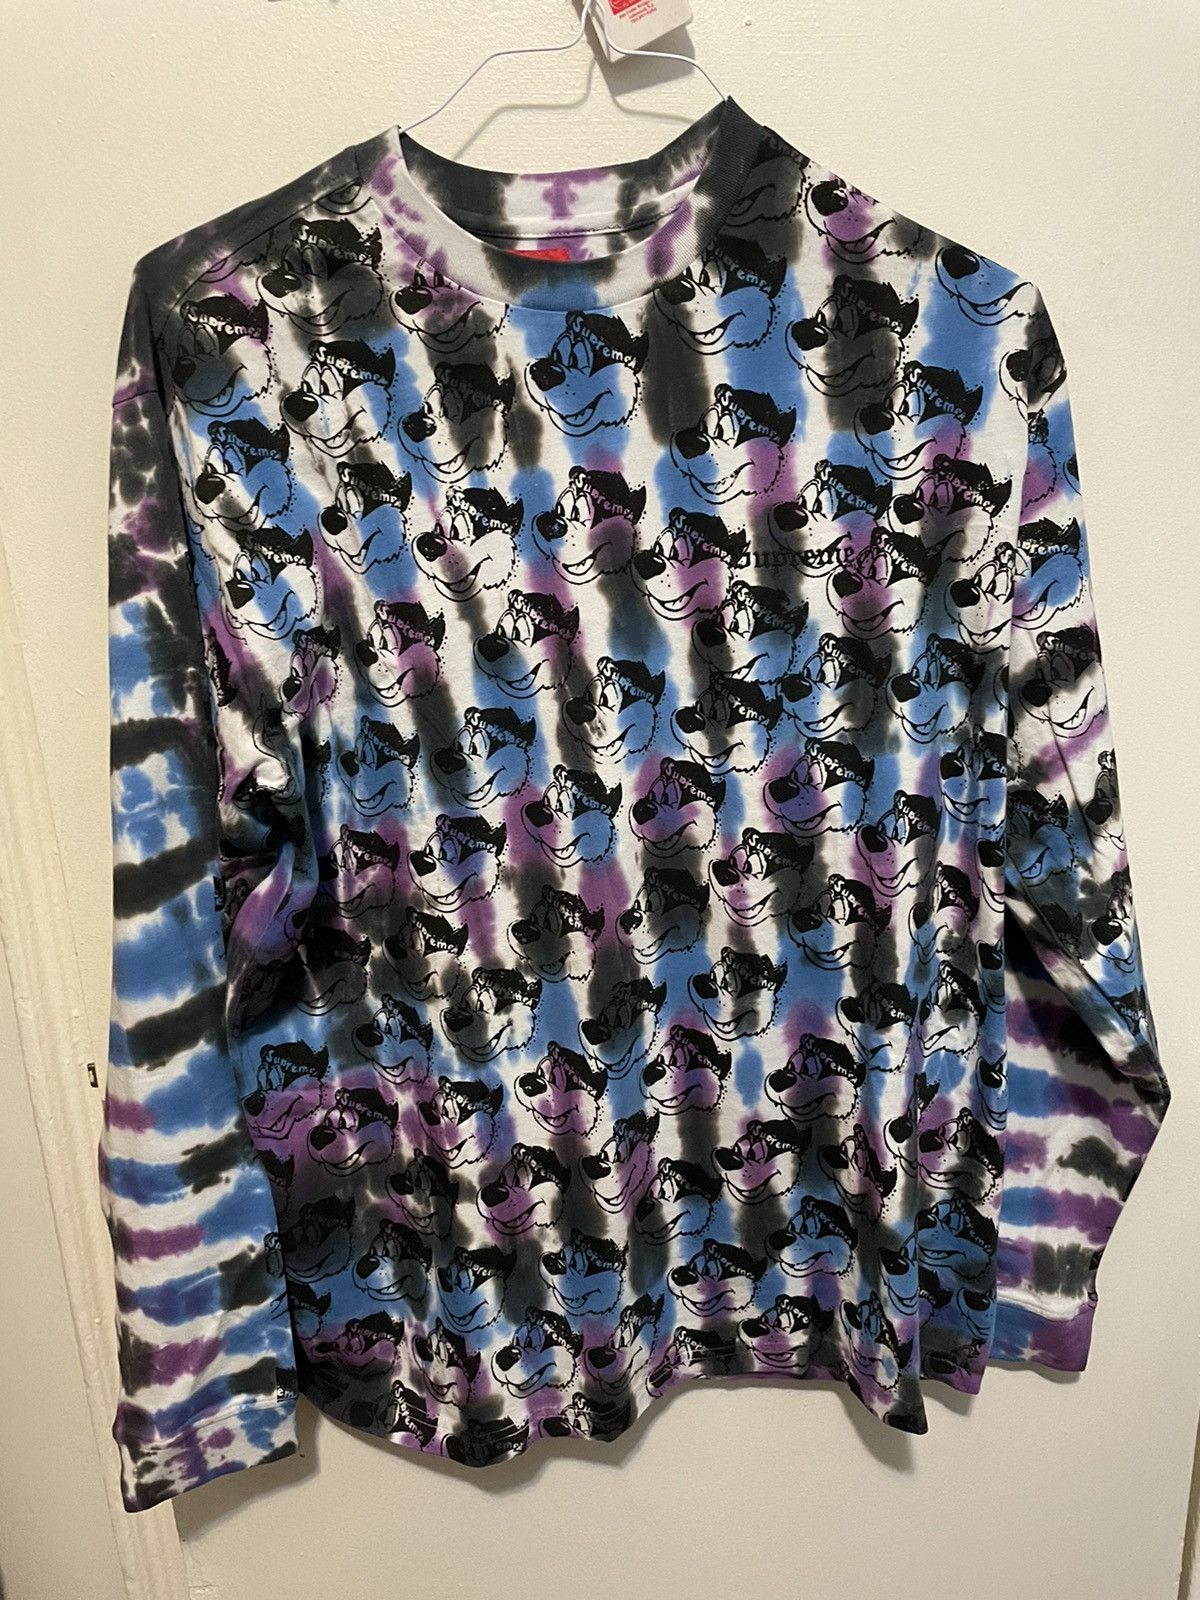 Supreme Dyed Bear l/s top | Grailed